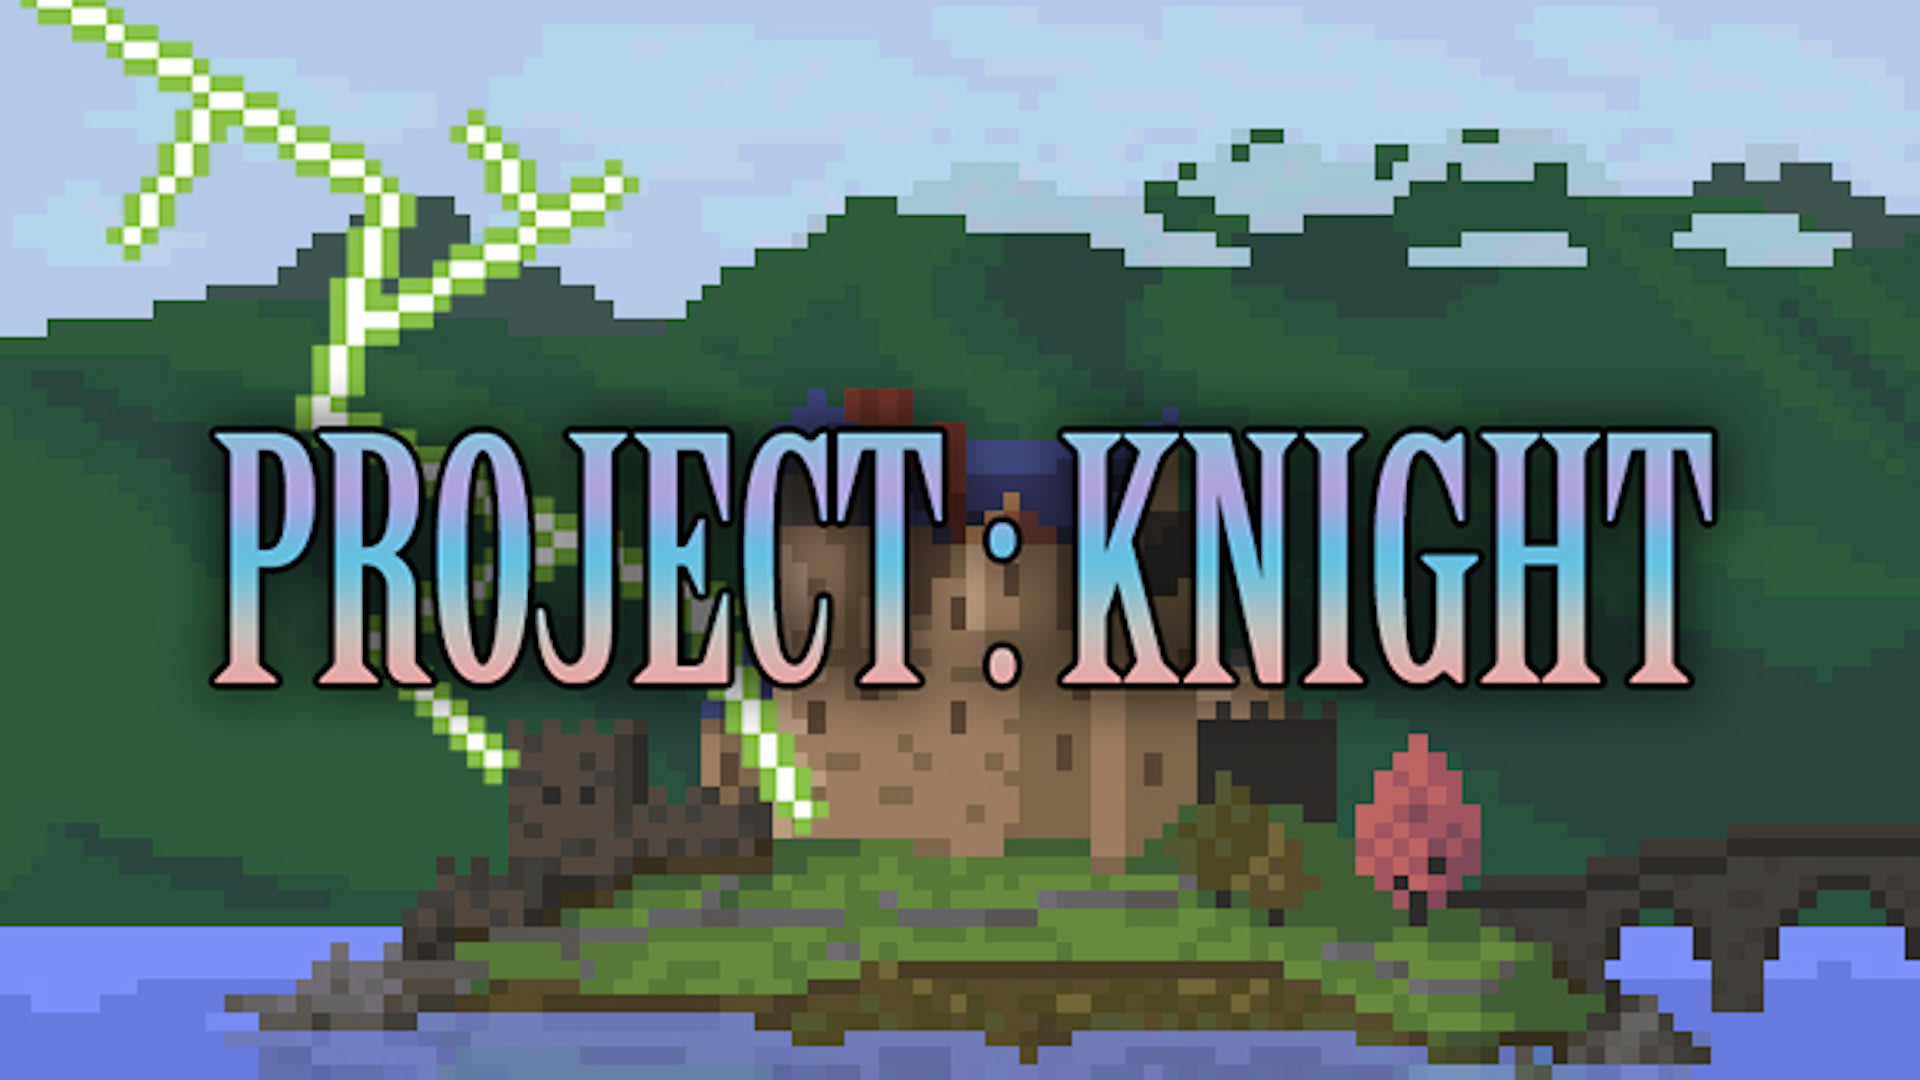 PROJECT : KNIGHT